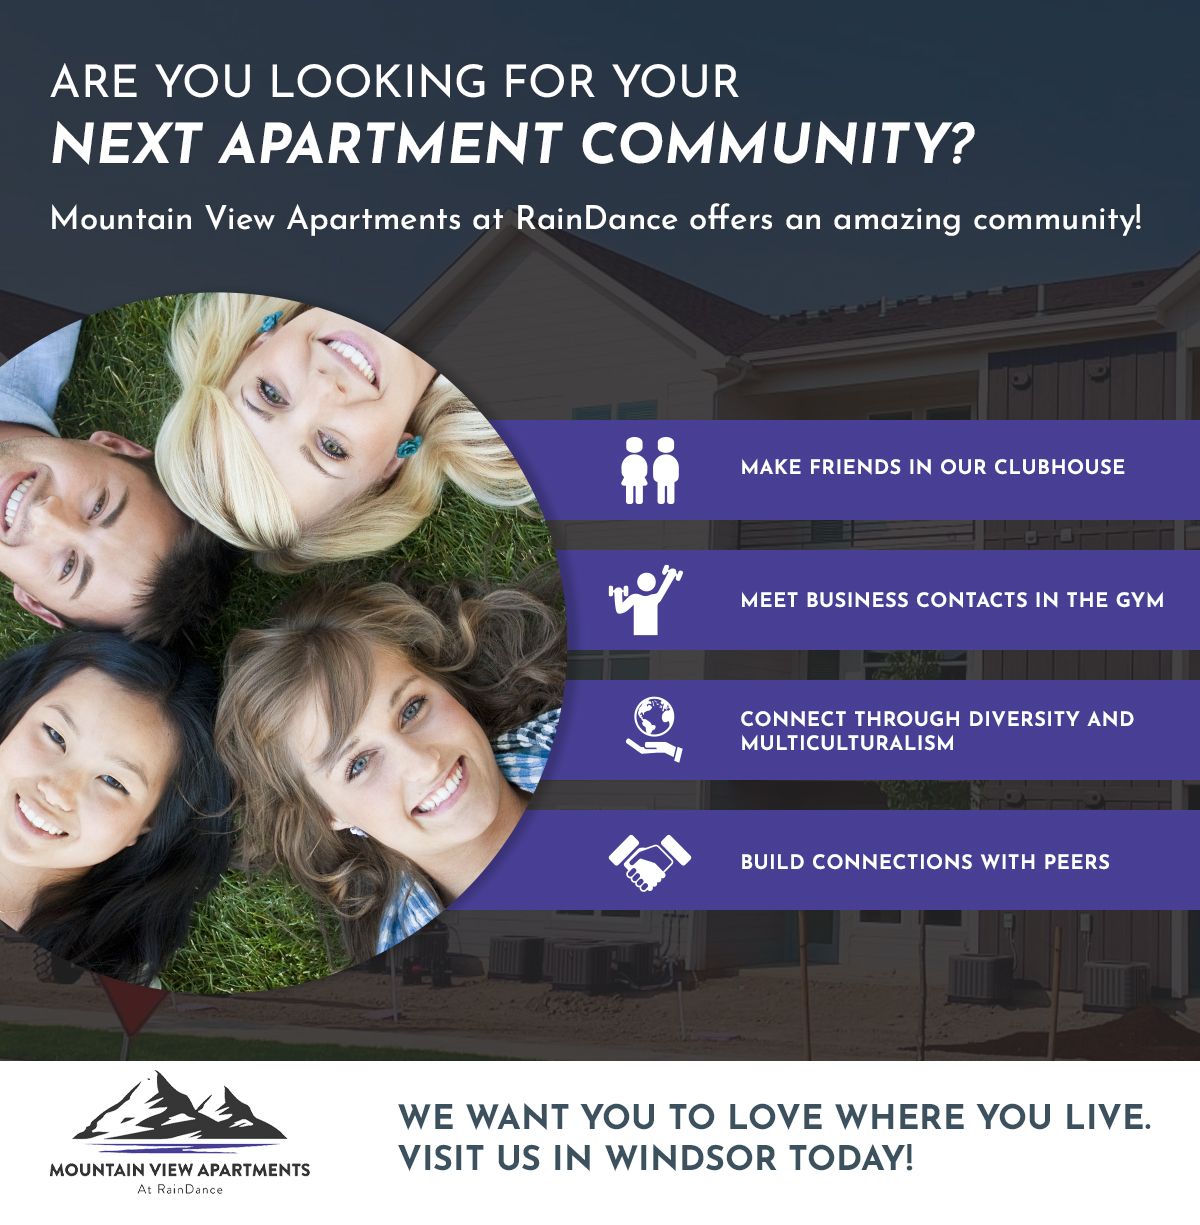 Are You Looking for Your Next Apartment Community?